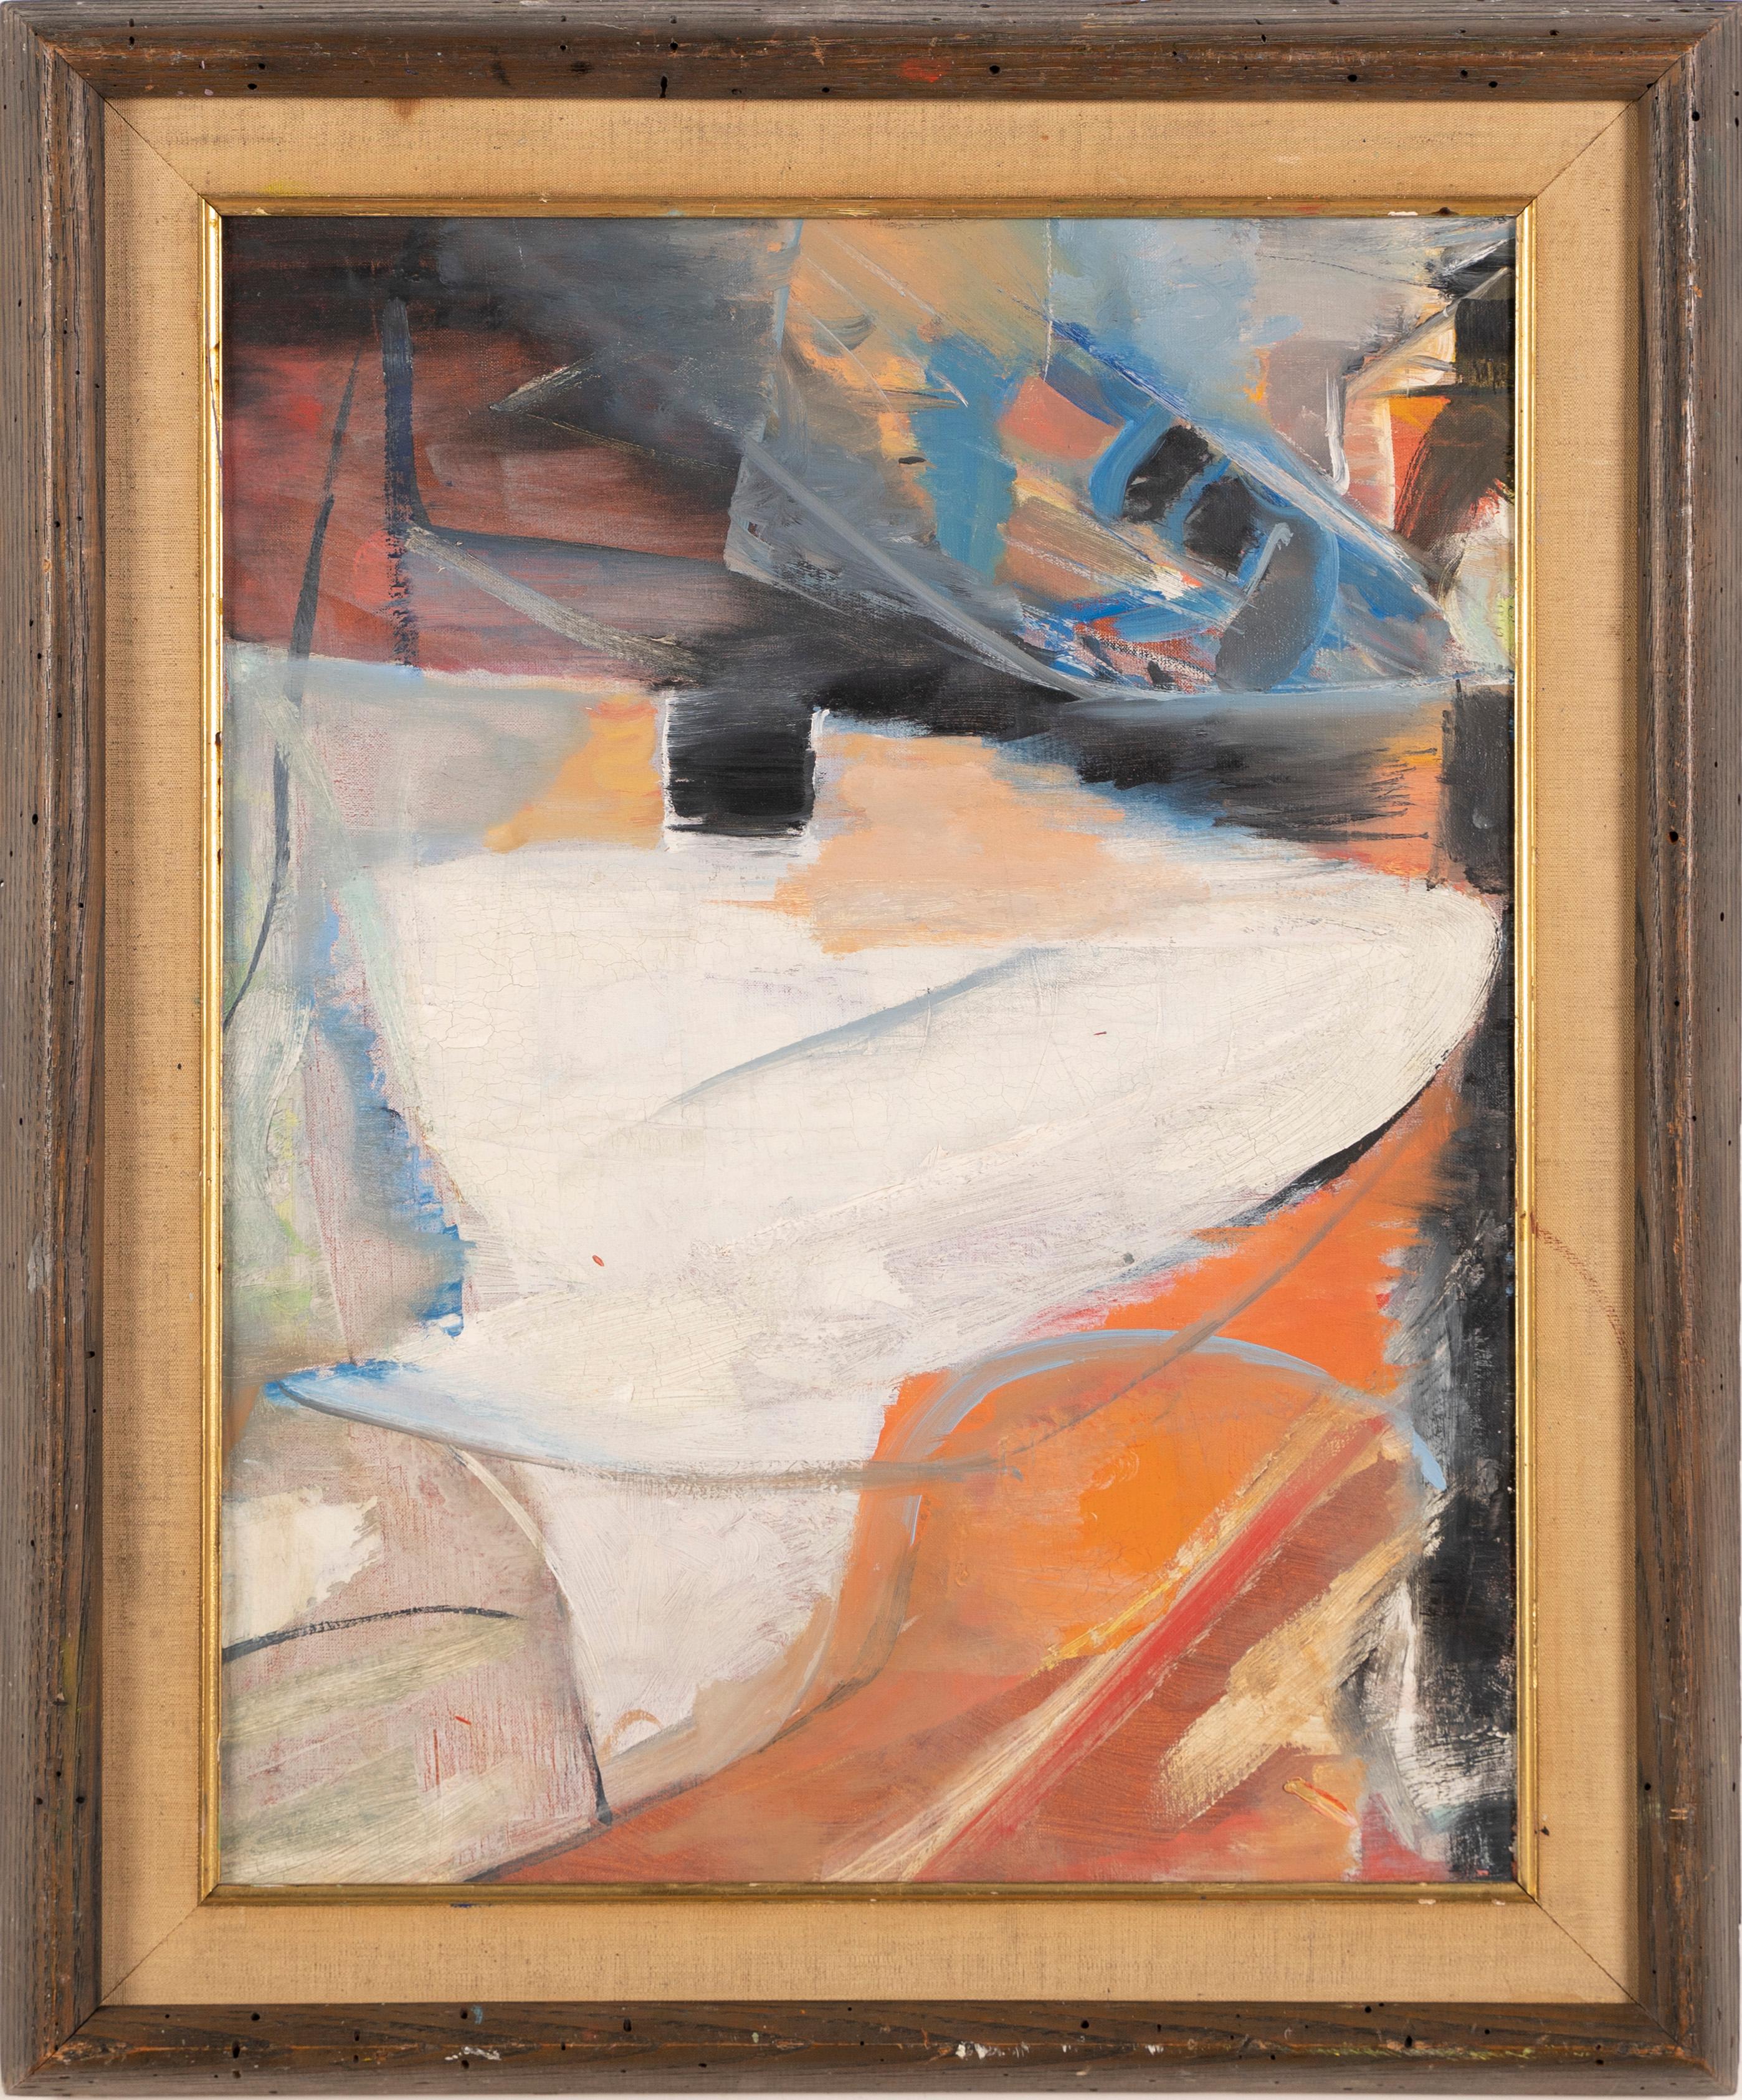 Vintage American modernist abstract painting..  Oil on canvas, circa 1940.  Unsigned.  Image size, 14L x 18H.  Housed in a period  frame.
